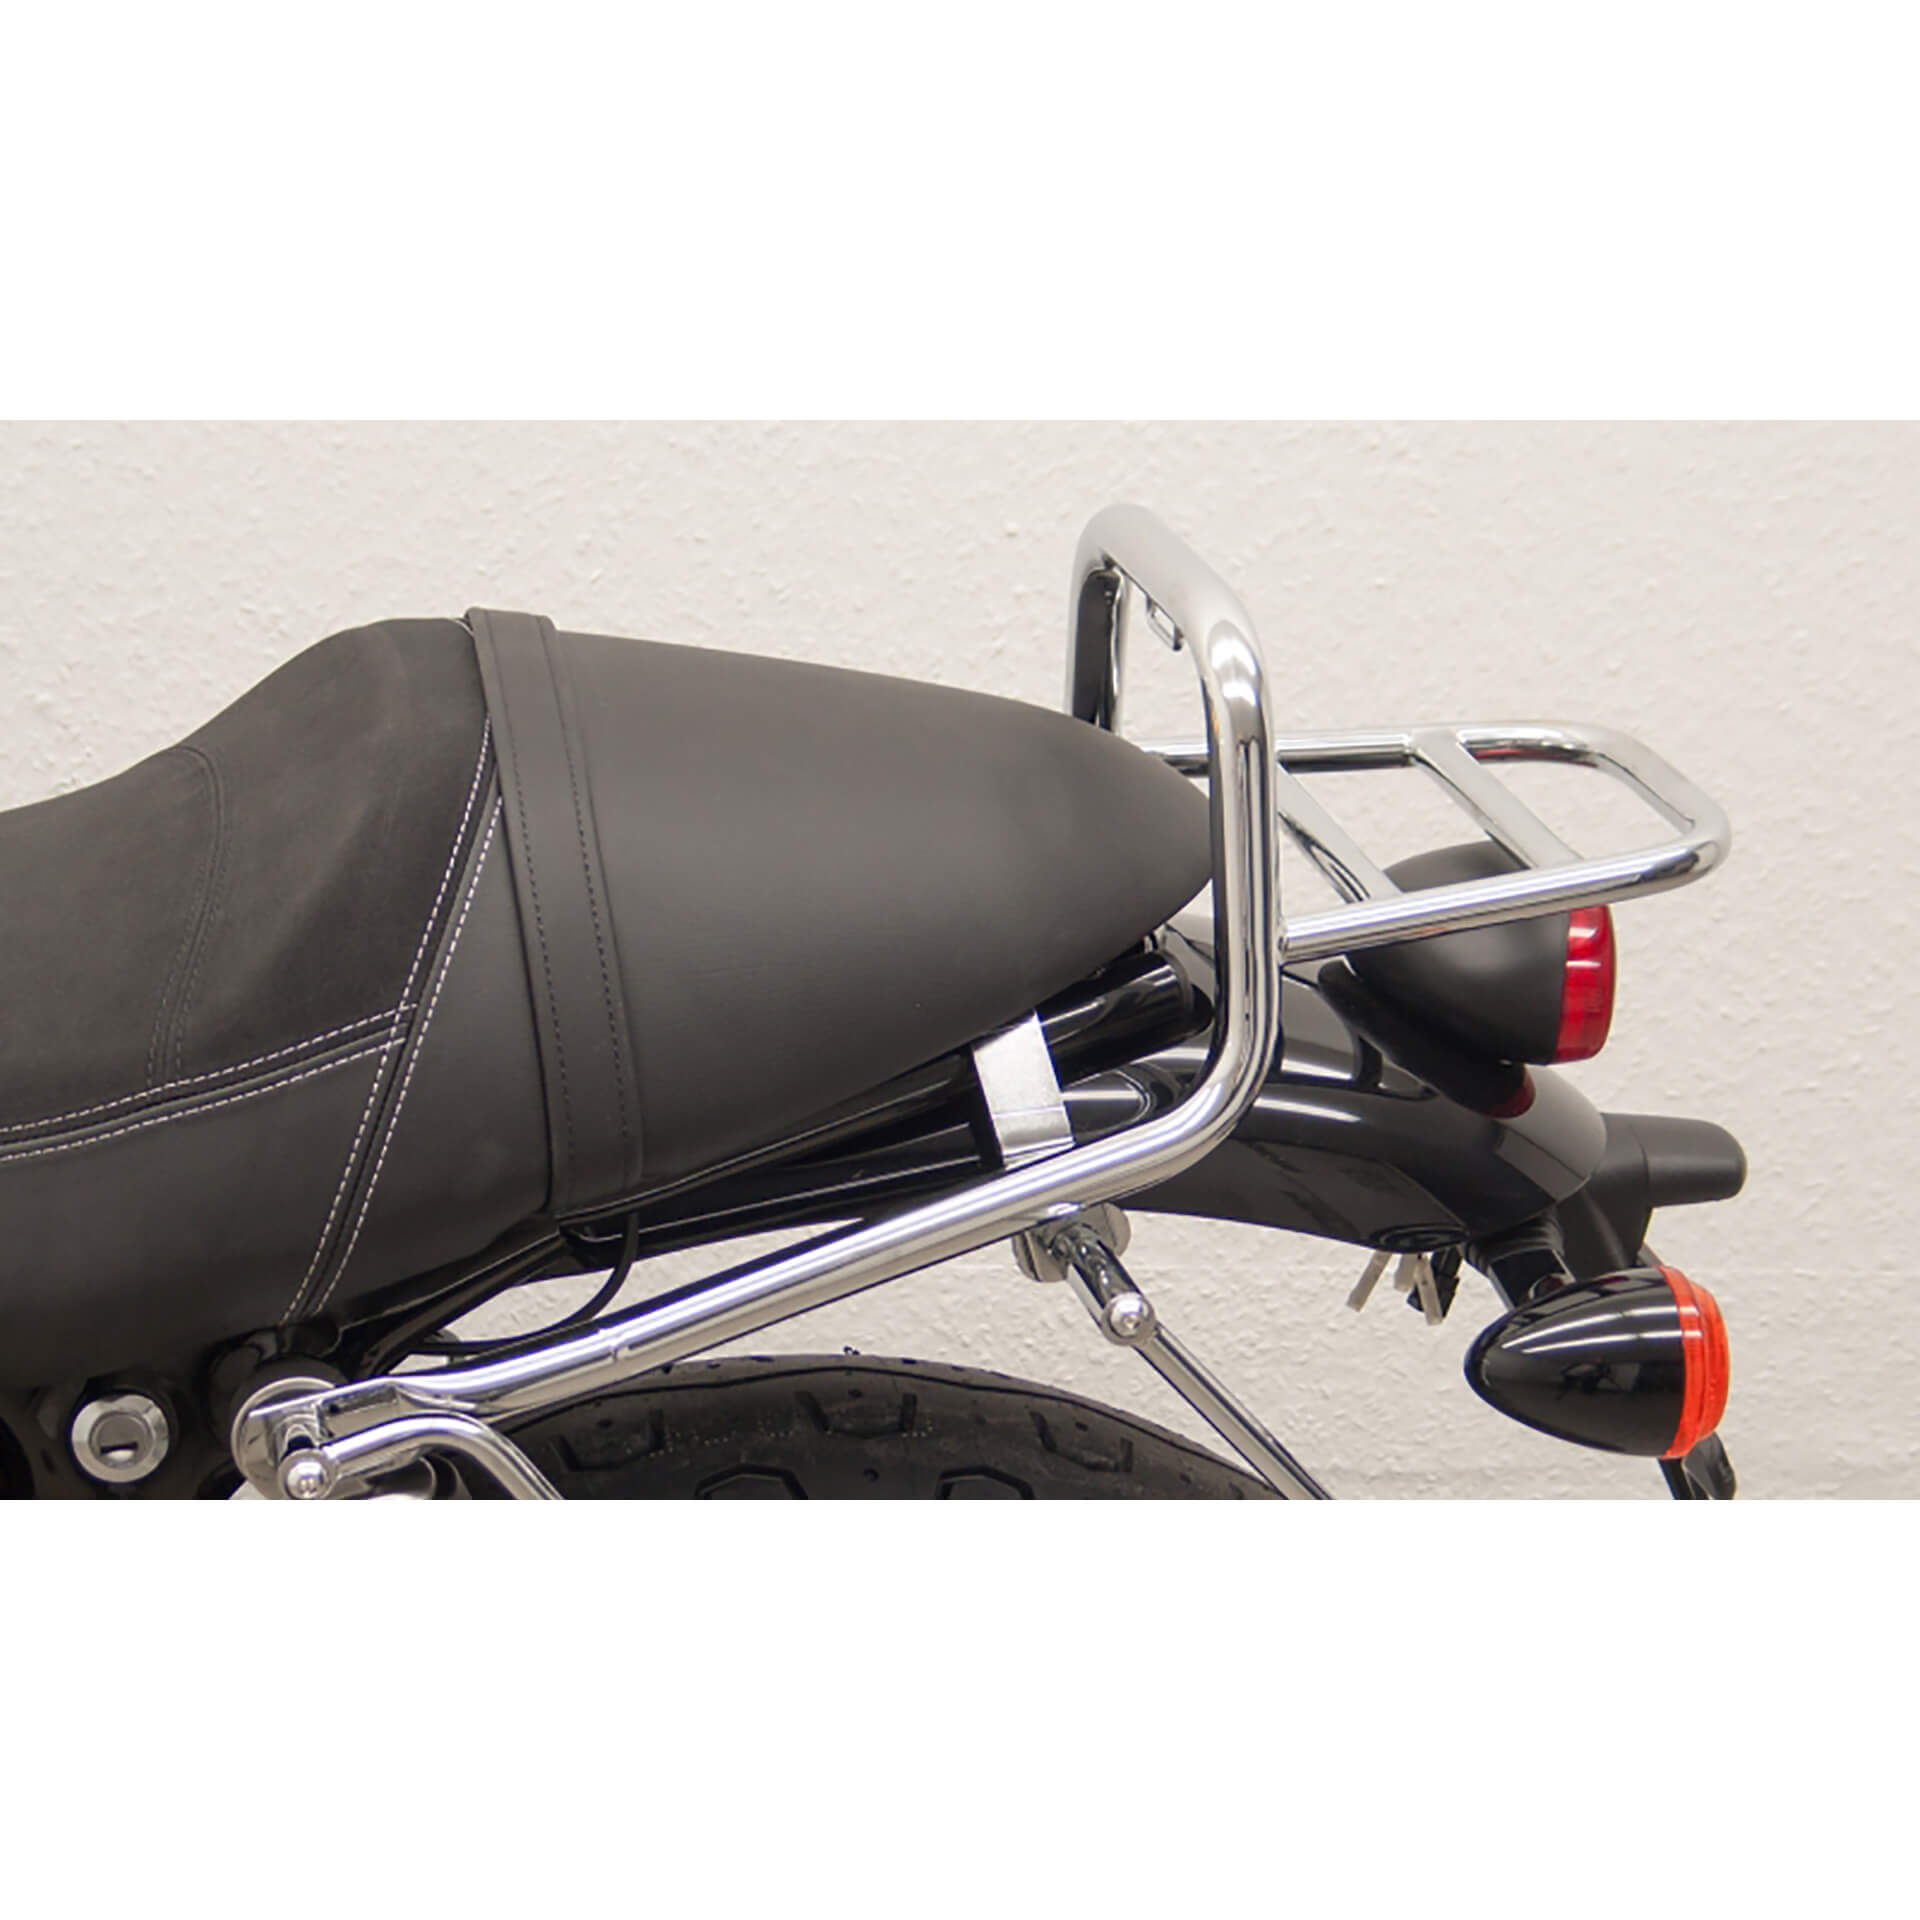 fehling Luggage Carrier Triumph Street Cup (77G), 2017-